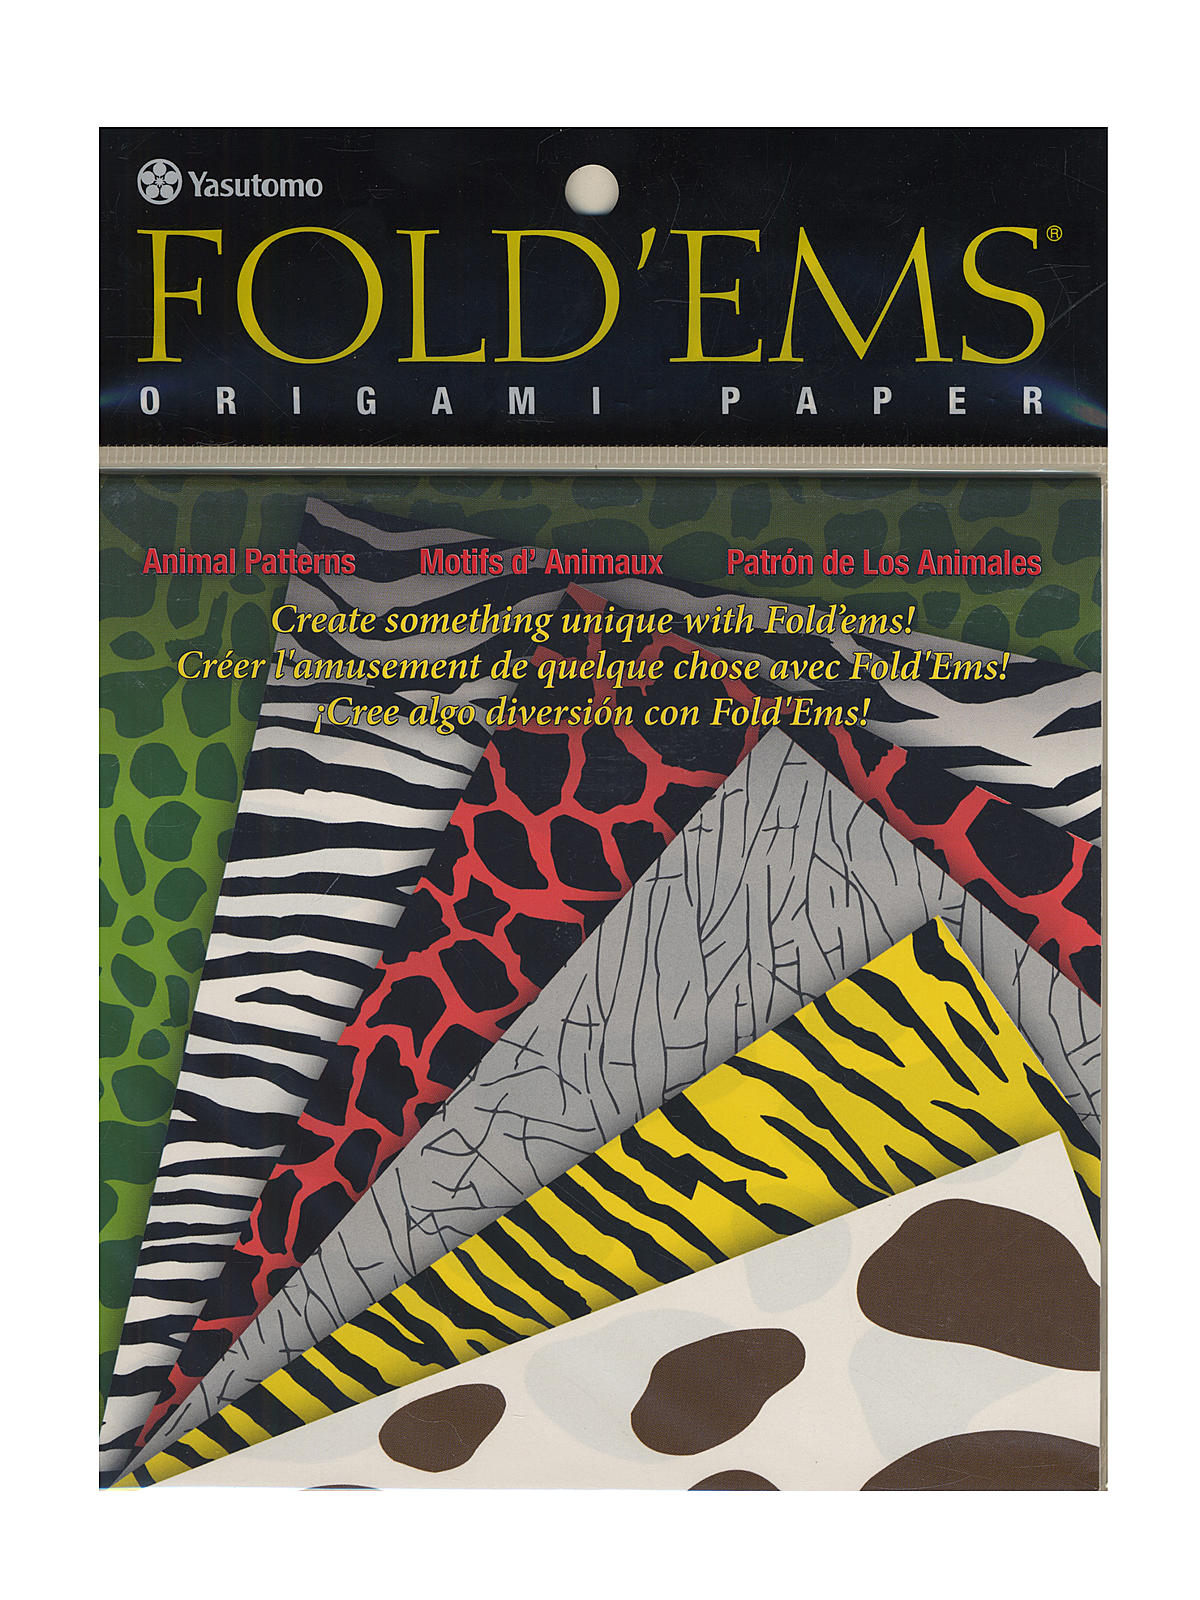 Fold'ems Origami Paper 6 Animal Patterns 5 7 8 In. Pack Of 24